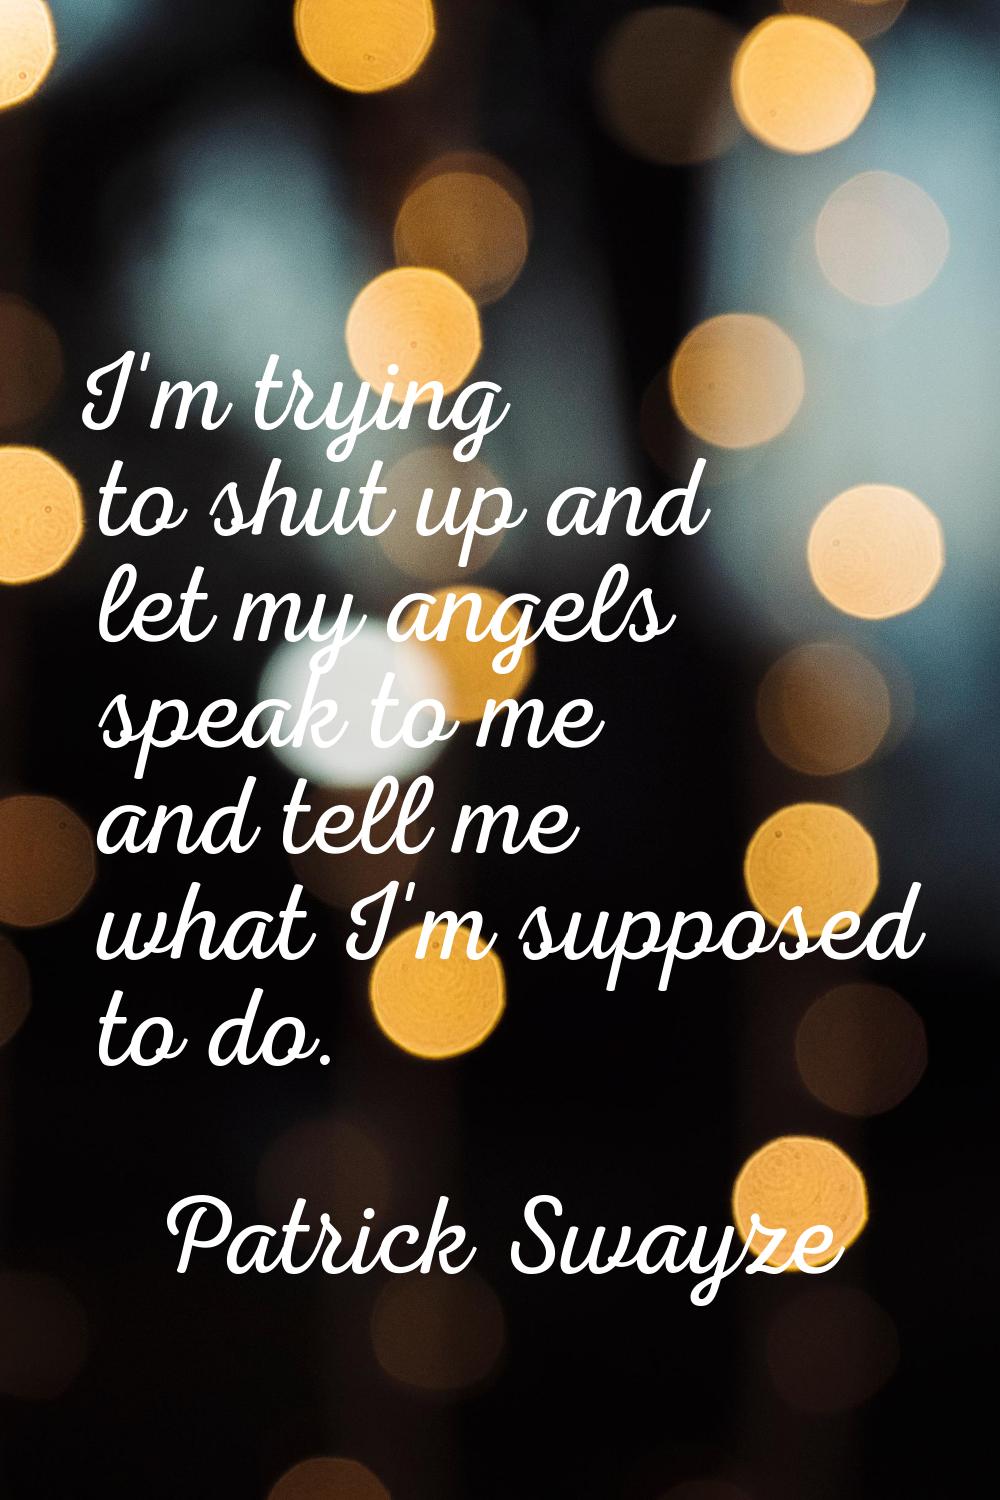 I'm trying to shut up and let my angels speak to me and tell me what I'm supposed to do.